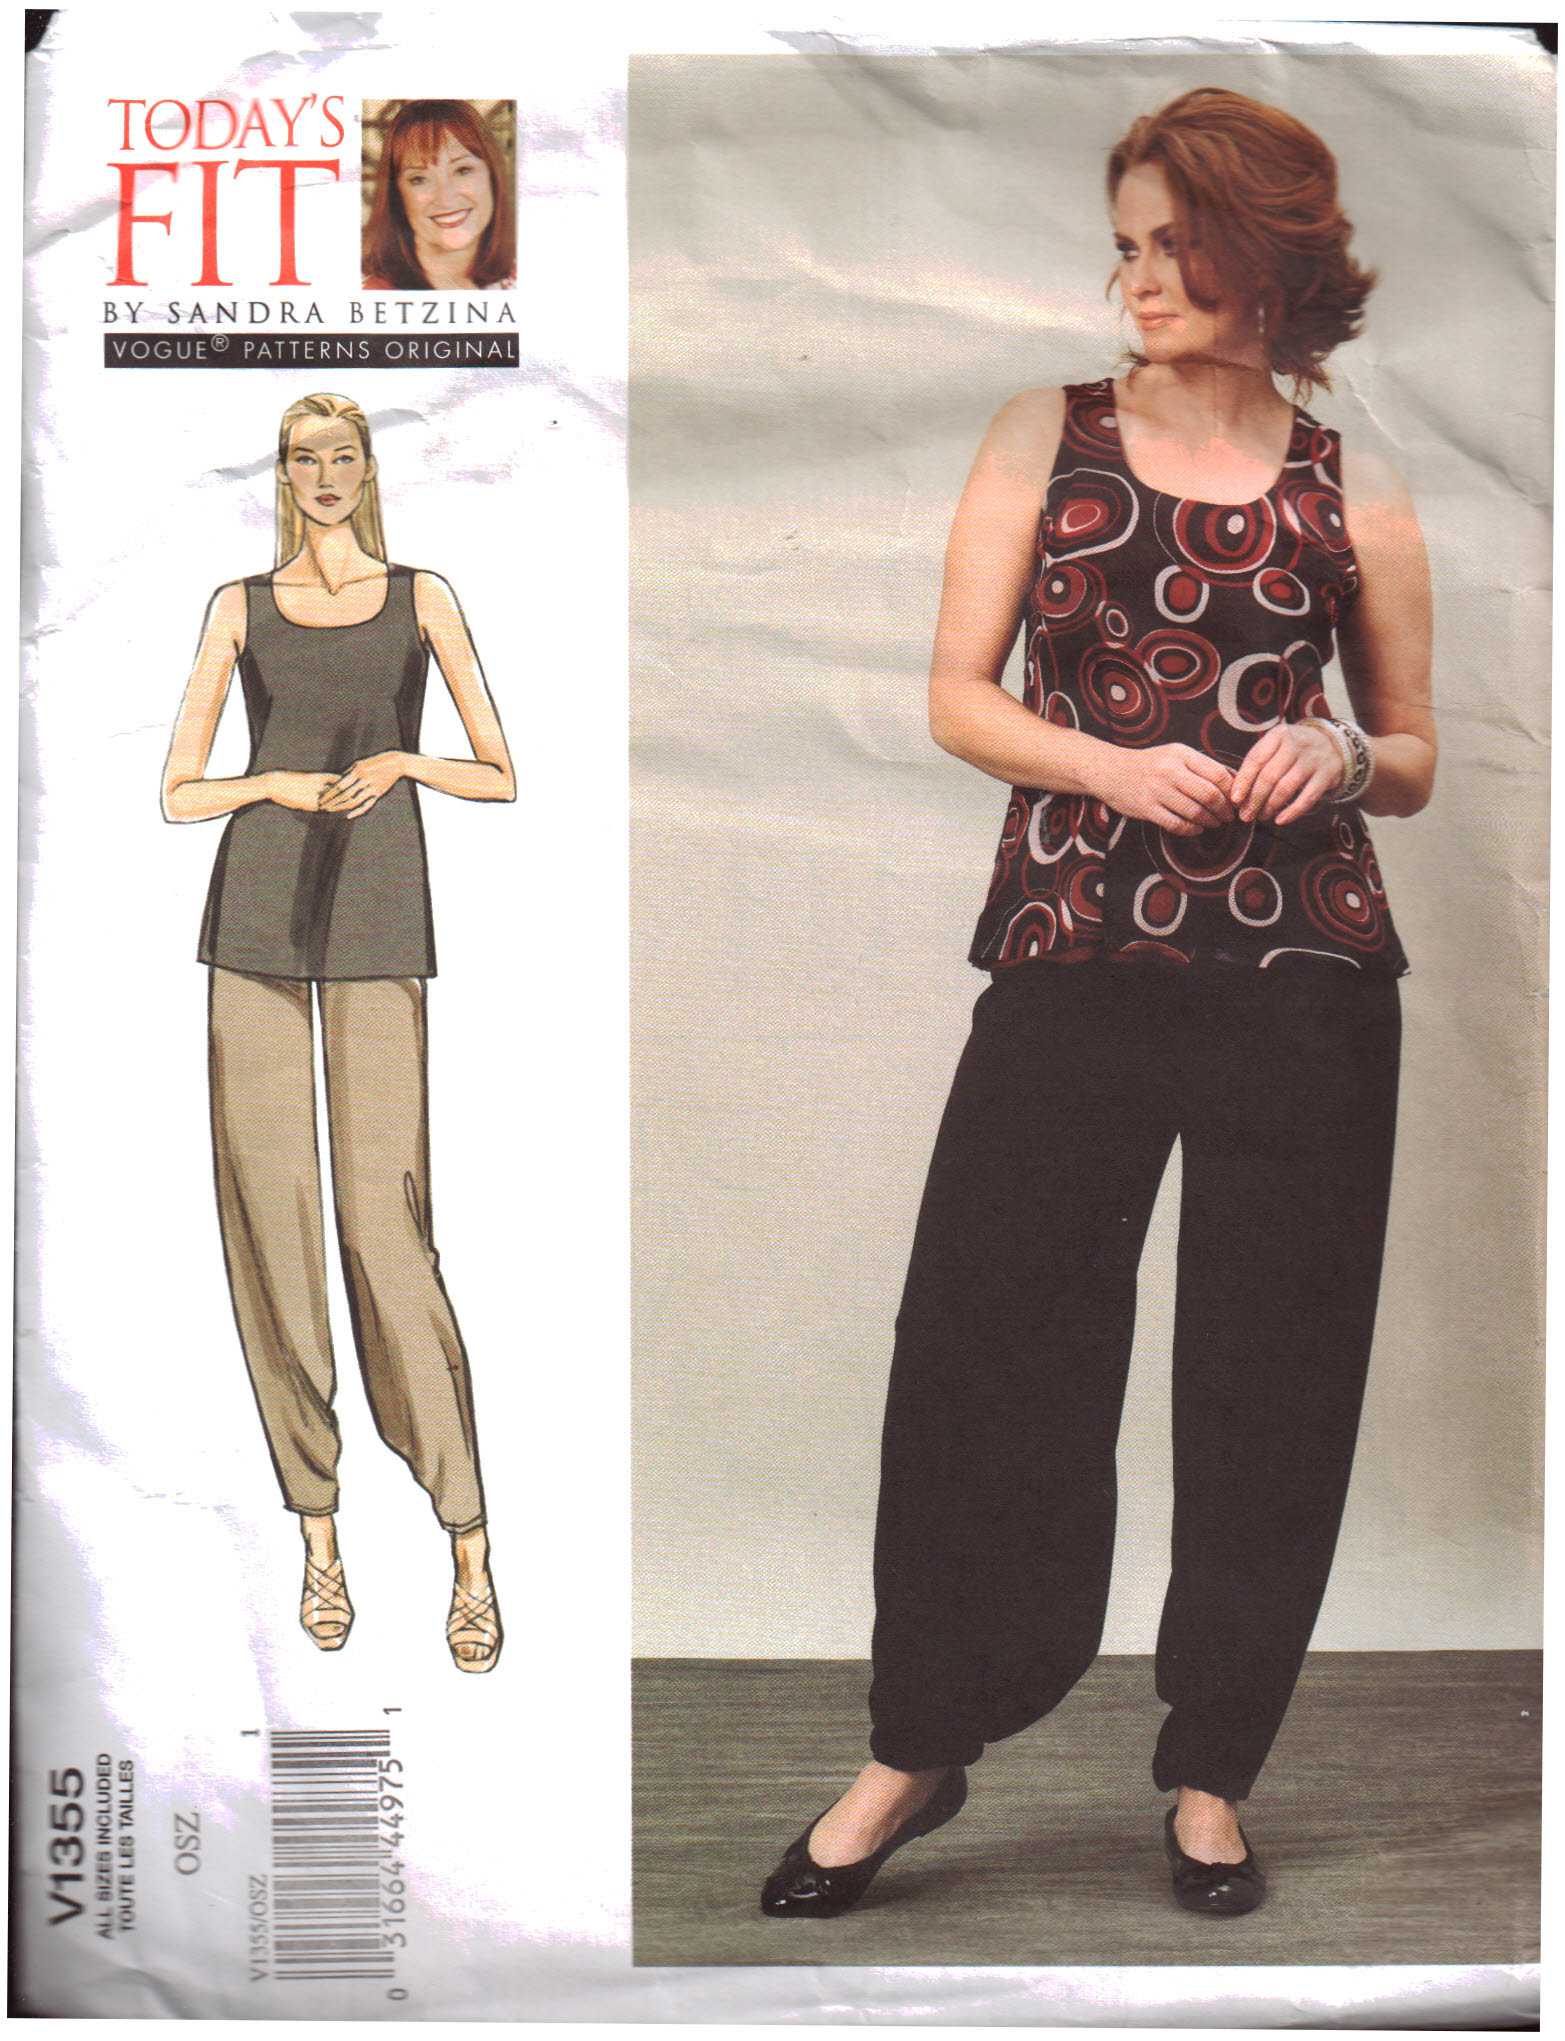 Amazoncom VOGUE PATTERNS V1142 Misses Top and Pants Size EE  14161820  Arts Crafts  Sewing